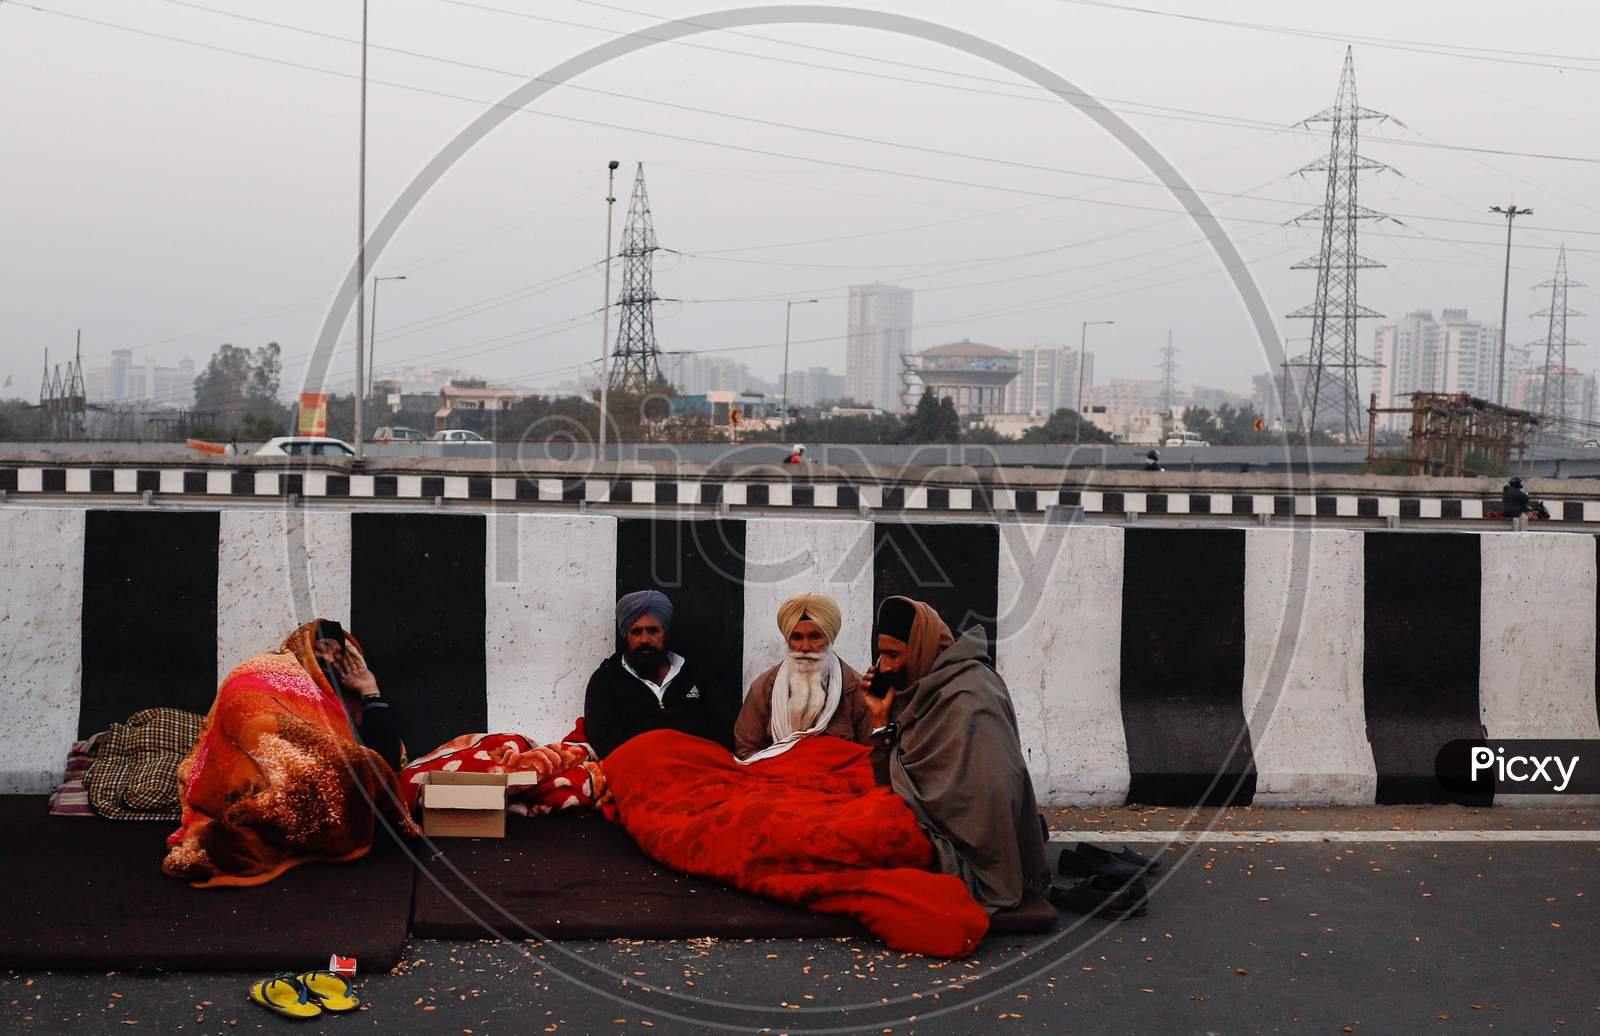 Farmers Sits On A Blocked National Highway At Gazipur Border Near New Delhi, On December 17, 2020, During An Ongoing Sit-In Protest Demanding The Rollback Of 3 Government Agricultural Reforms Bill. More Than 20 Protesters Have Died Since The Agitation Began In November-End, Farmer Groups Claim.